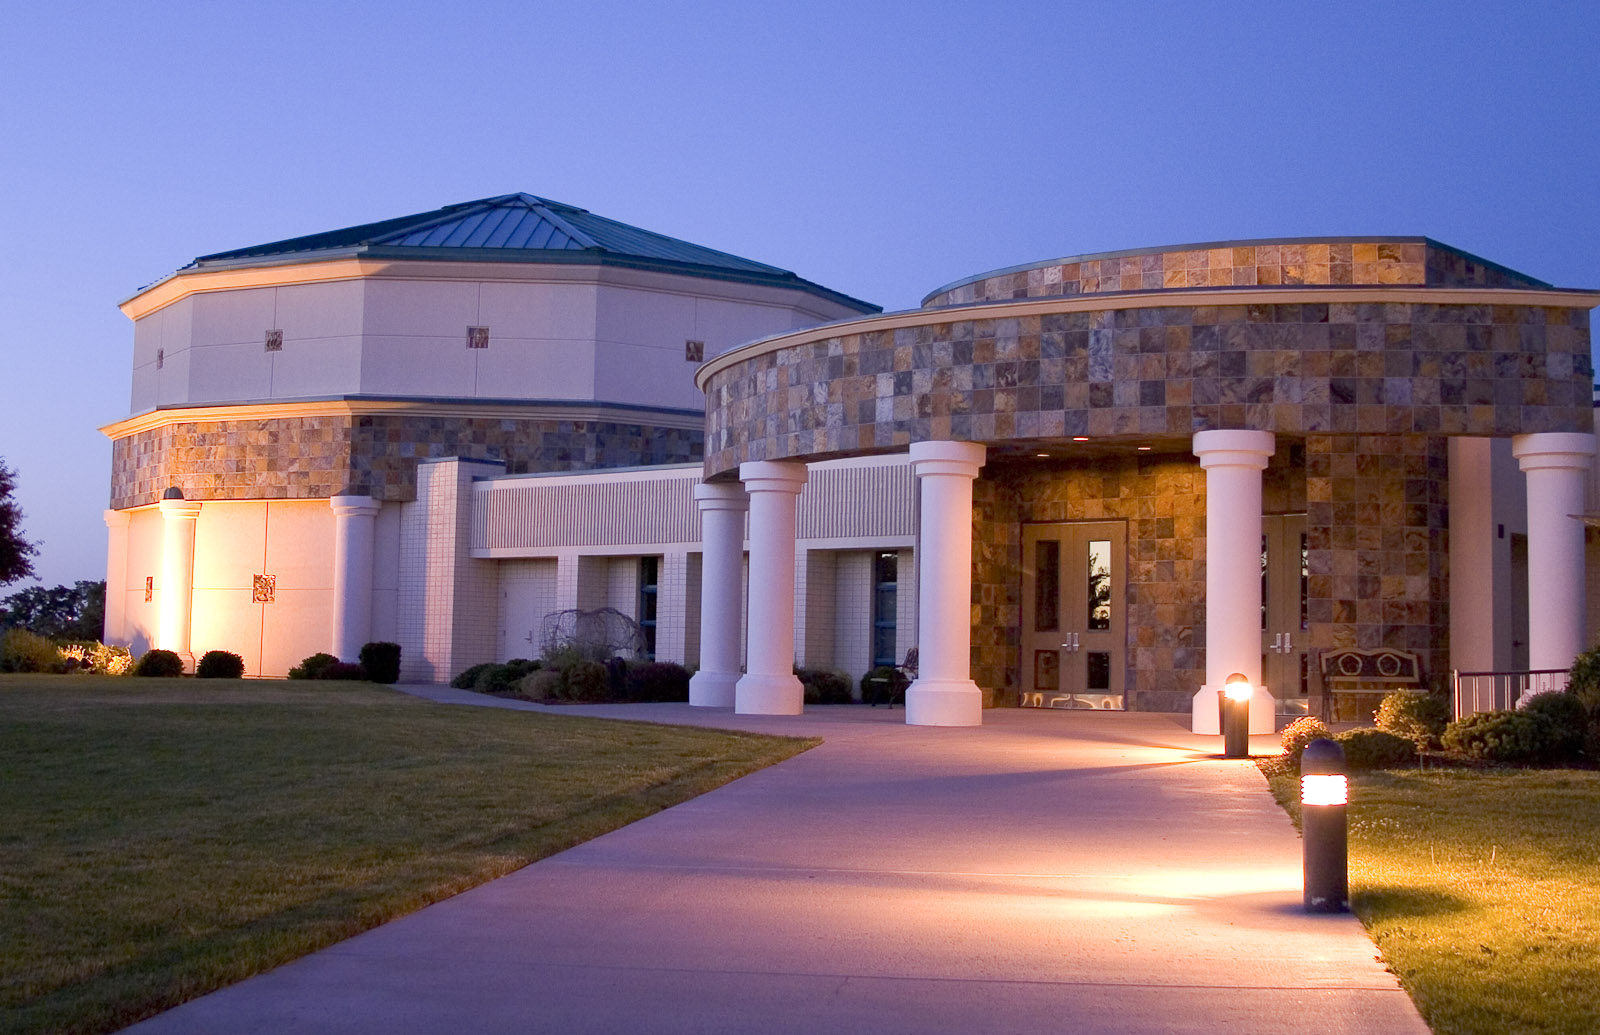 The exterior of the Herrett Center at the College of Southern Idaho at dusk.